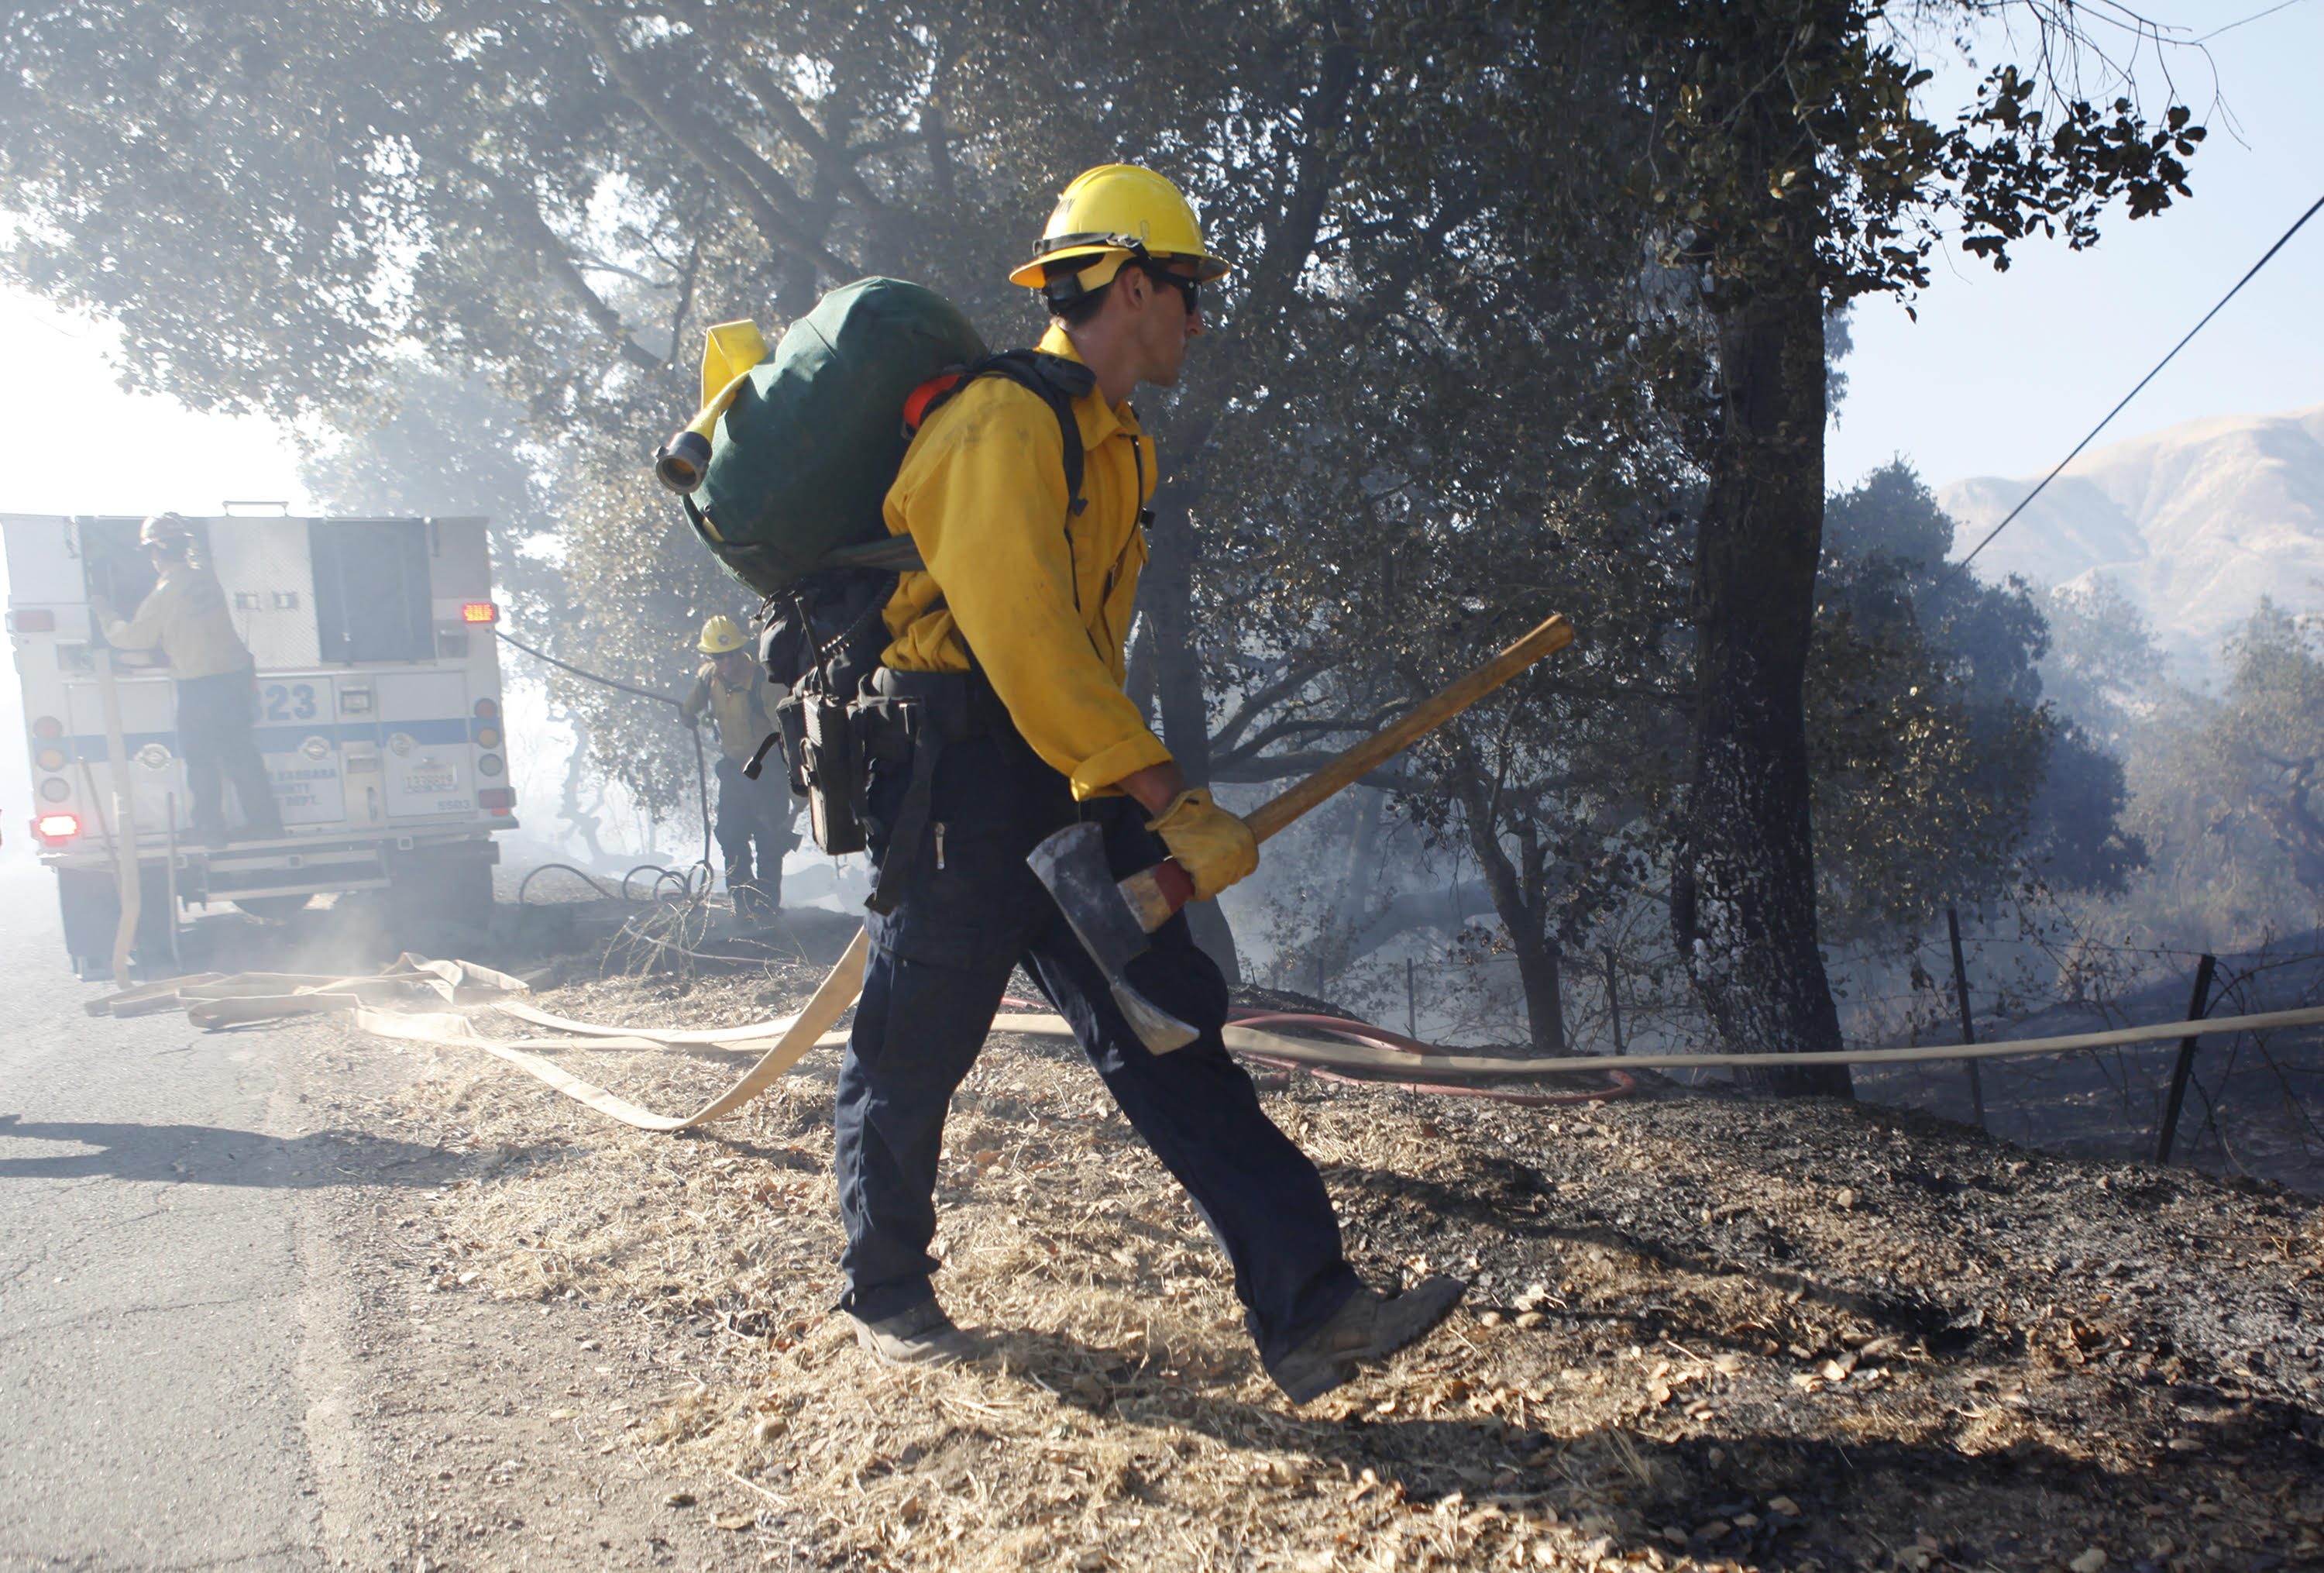 Mesa Fire along Foxen Canyon Road controlled quickly